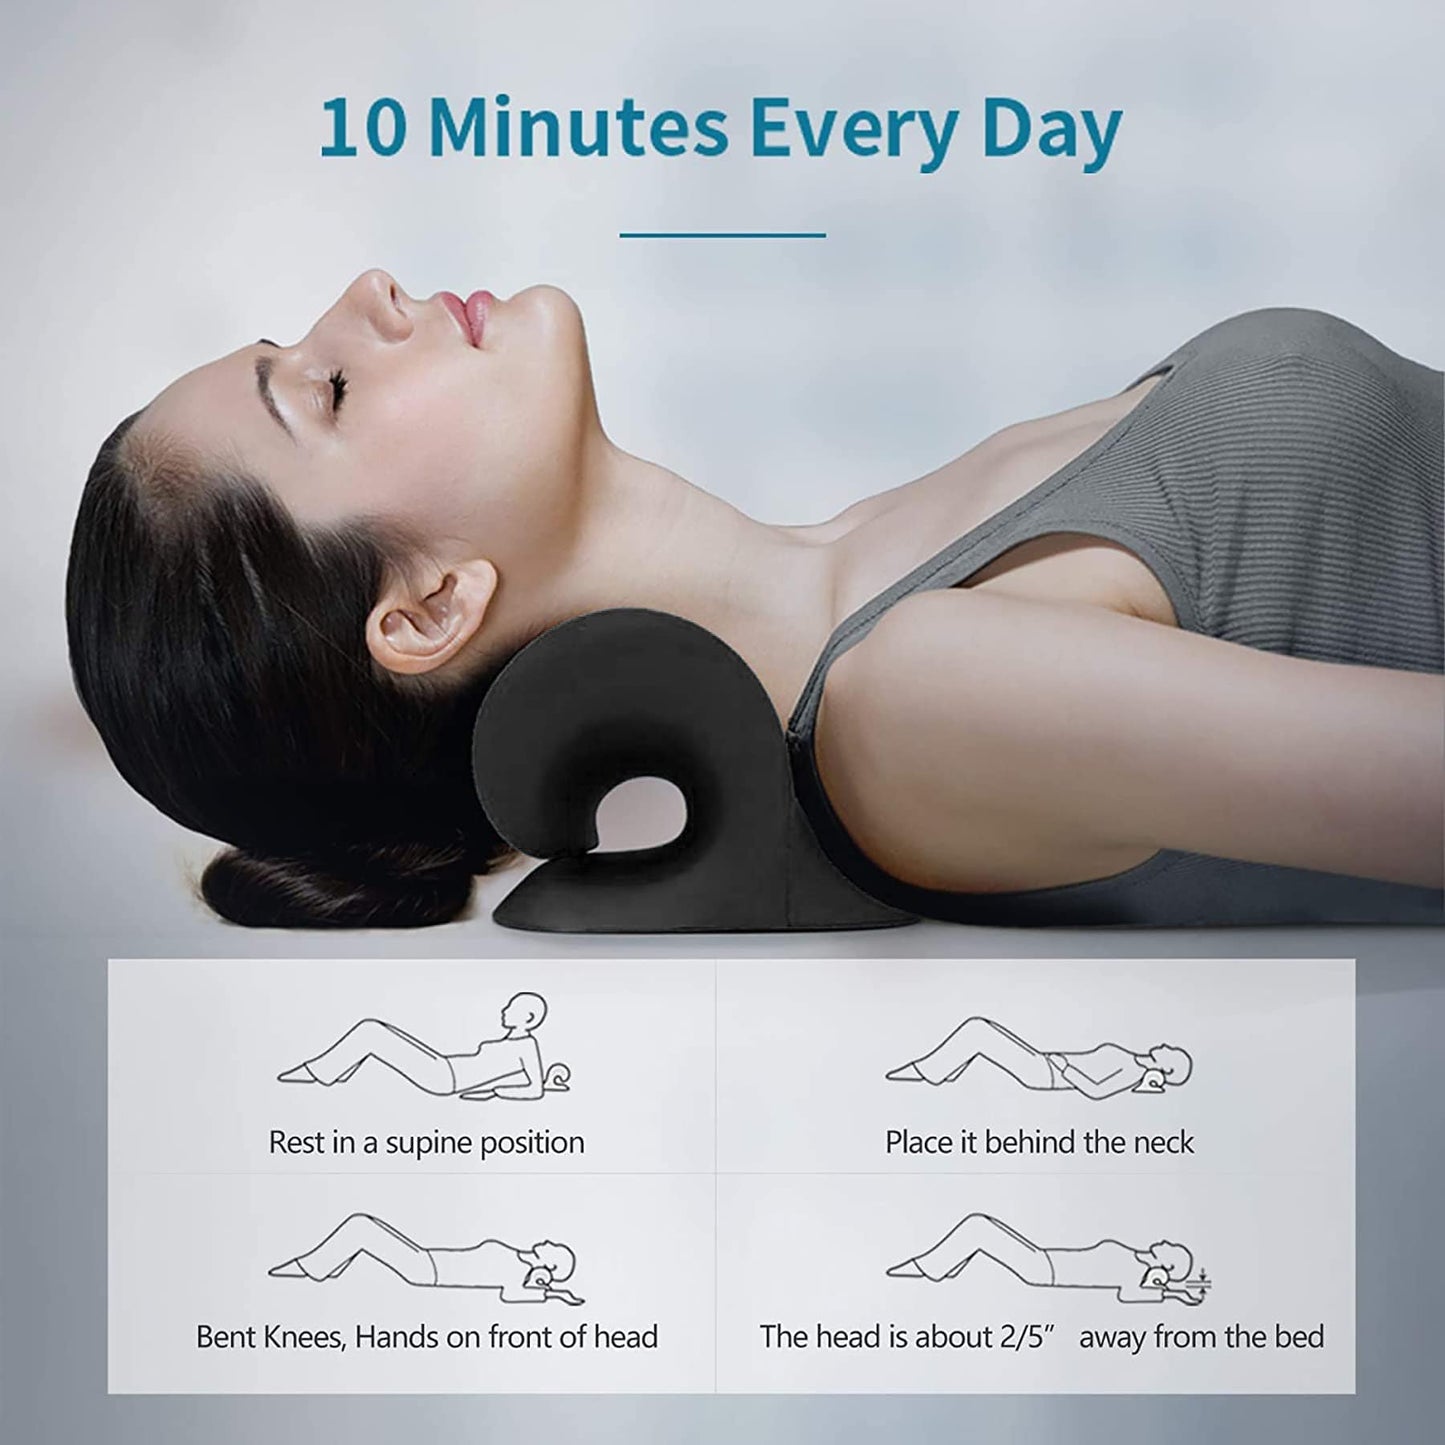 RESTCLOUD Neck and Shoulder Relaxer, Cervical Traction Device for TMJ Pain Relief and Cervical Spine Alignment, Chiropractic Pillow, Neck Stretcher